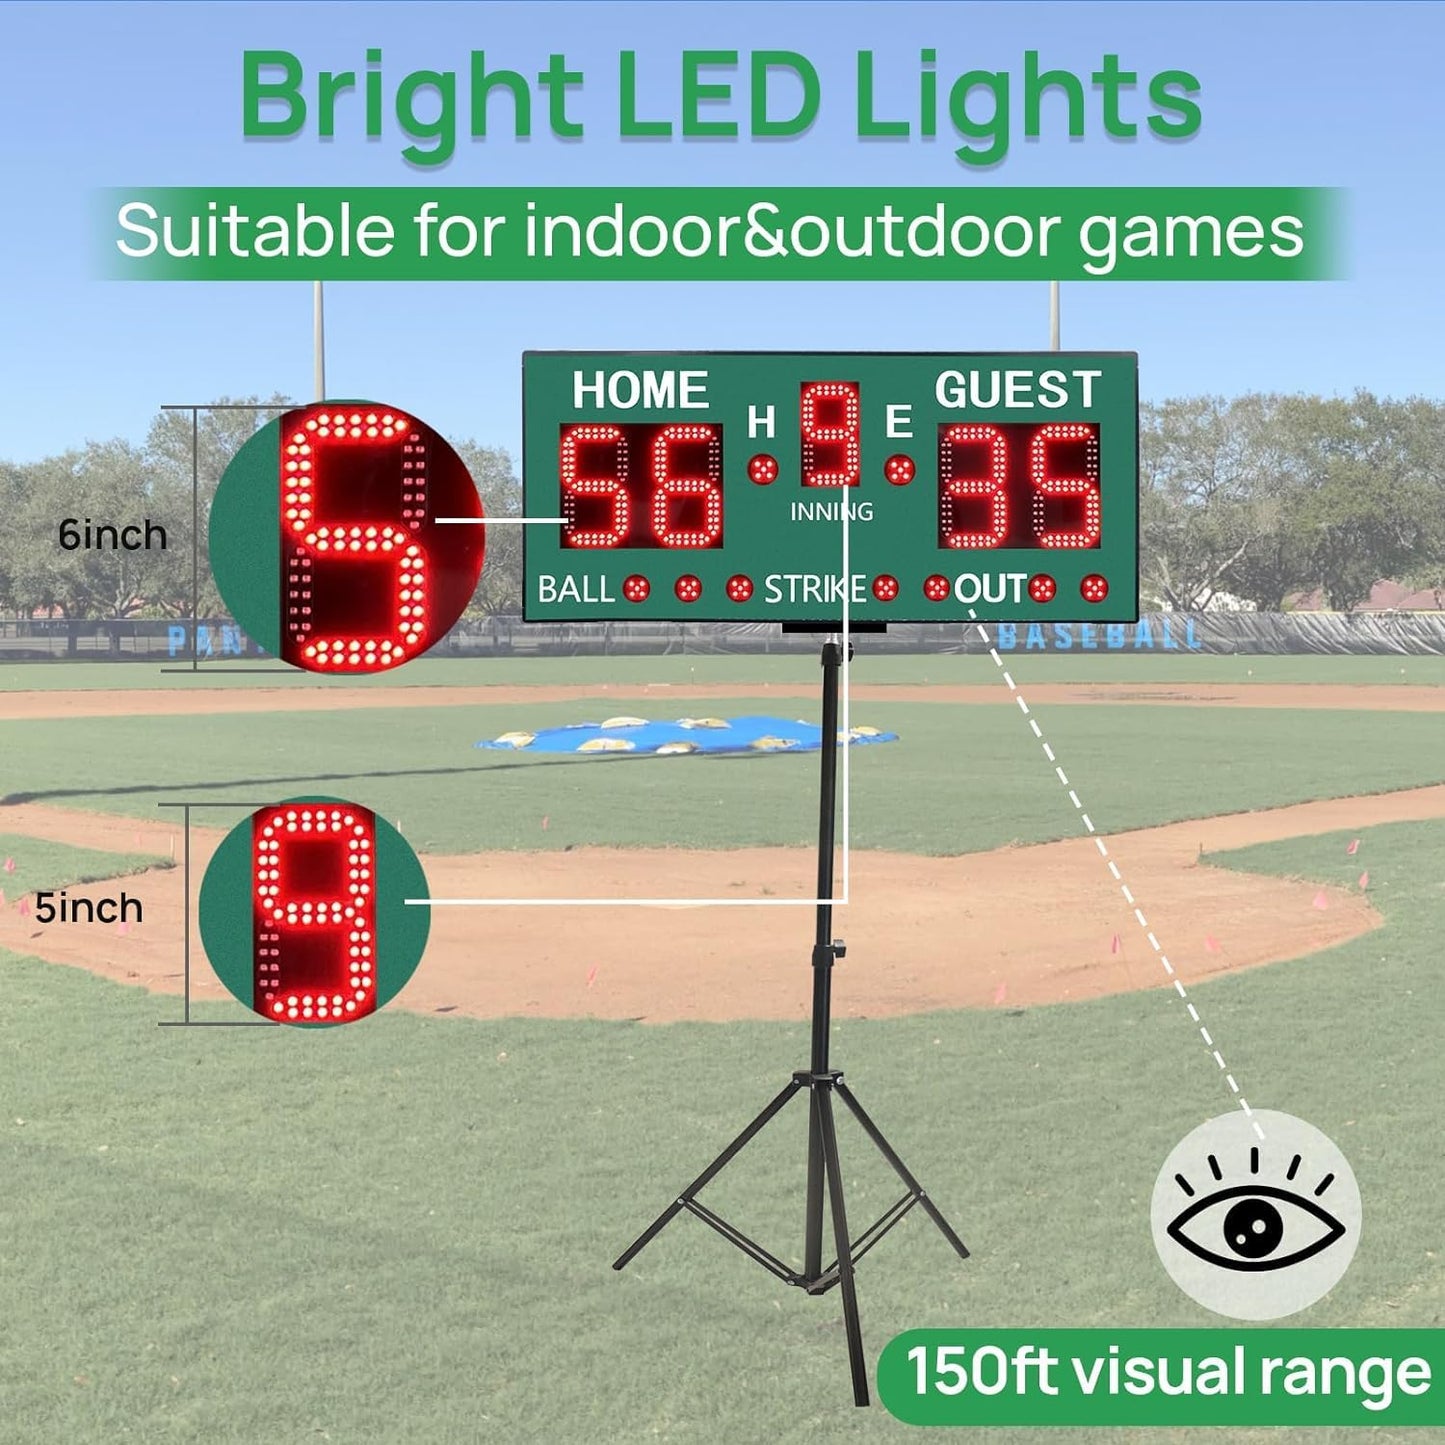 LED Portable Baseball Scoreboard for Fence, High-Light Digital Scoreboard with Remote, Rechargeable Wireless Electronic Baseball Scoreboard, Baseball Score Keeper with Innings Balls Strikes Outs